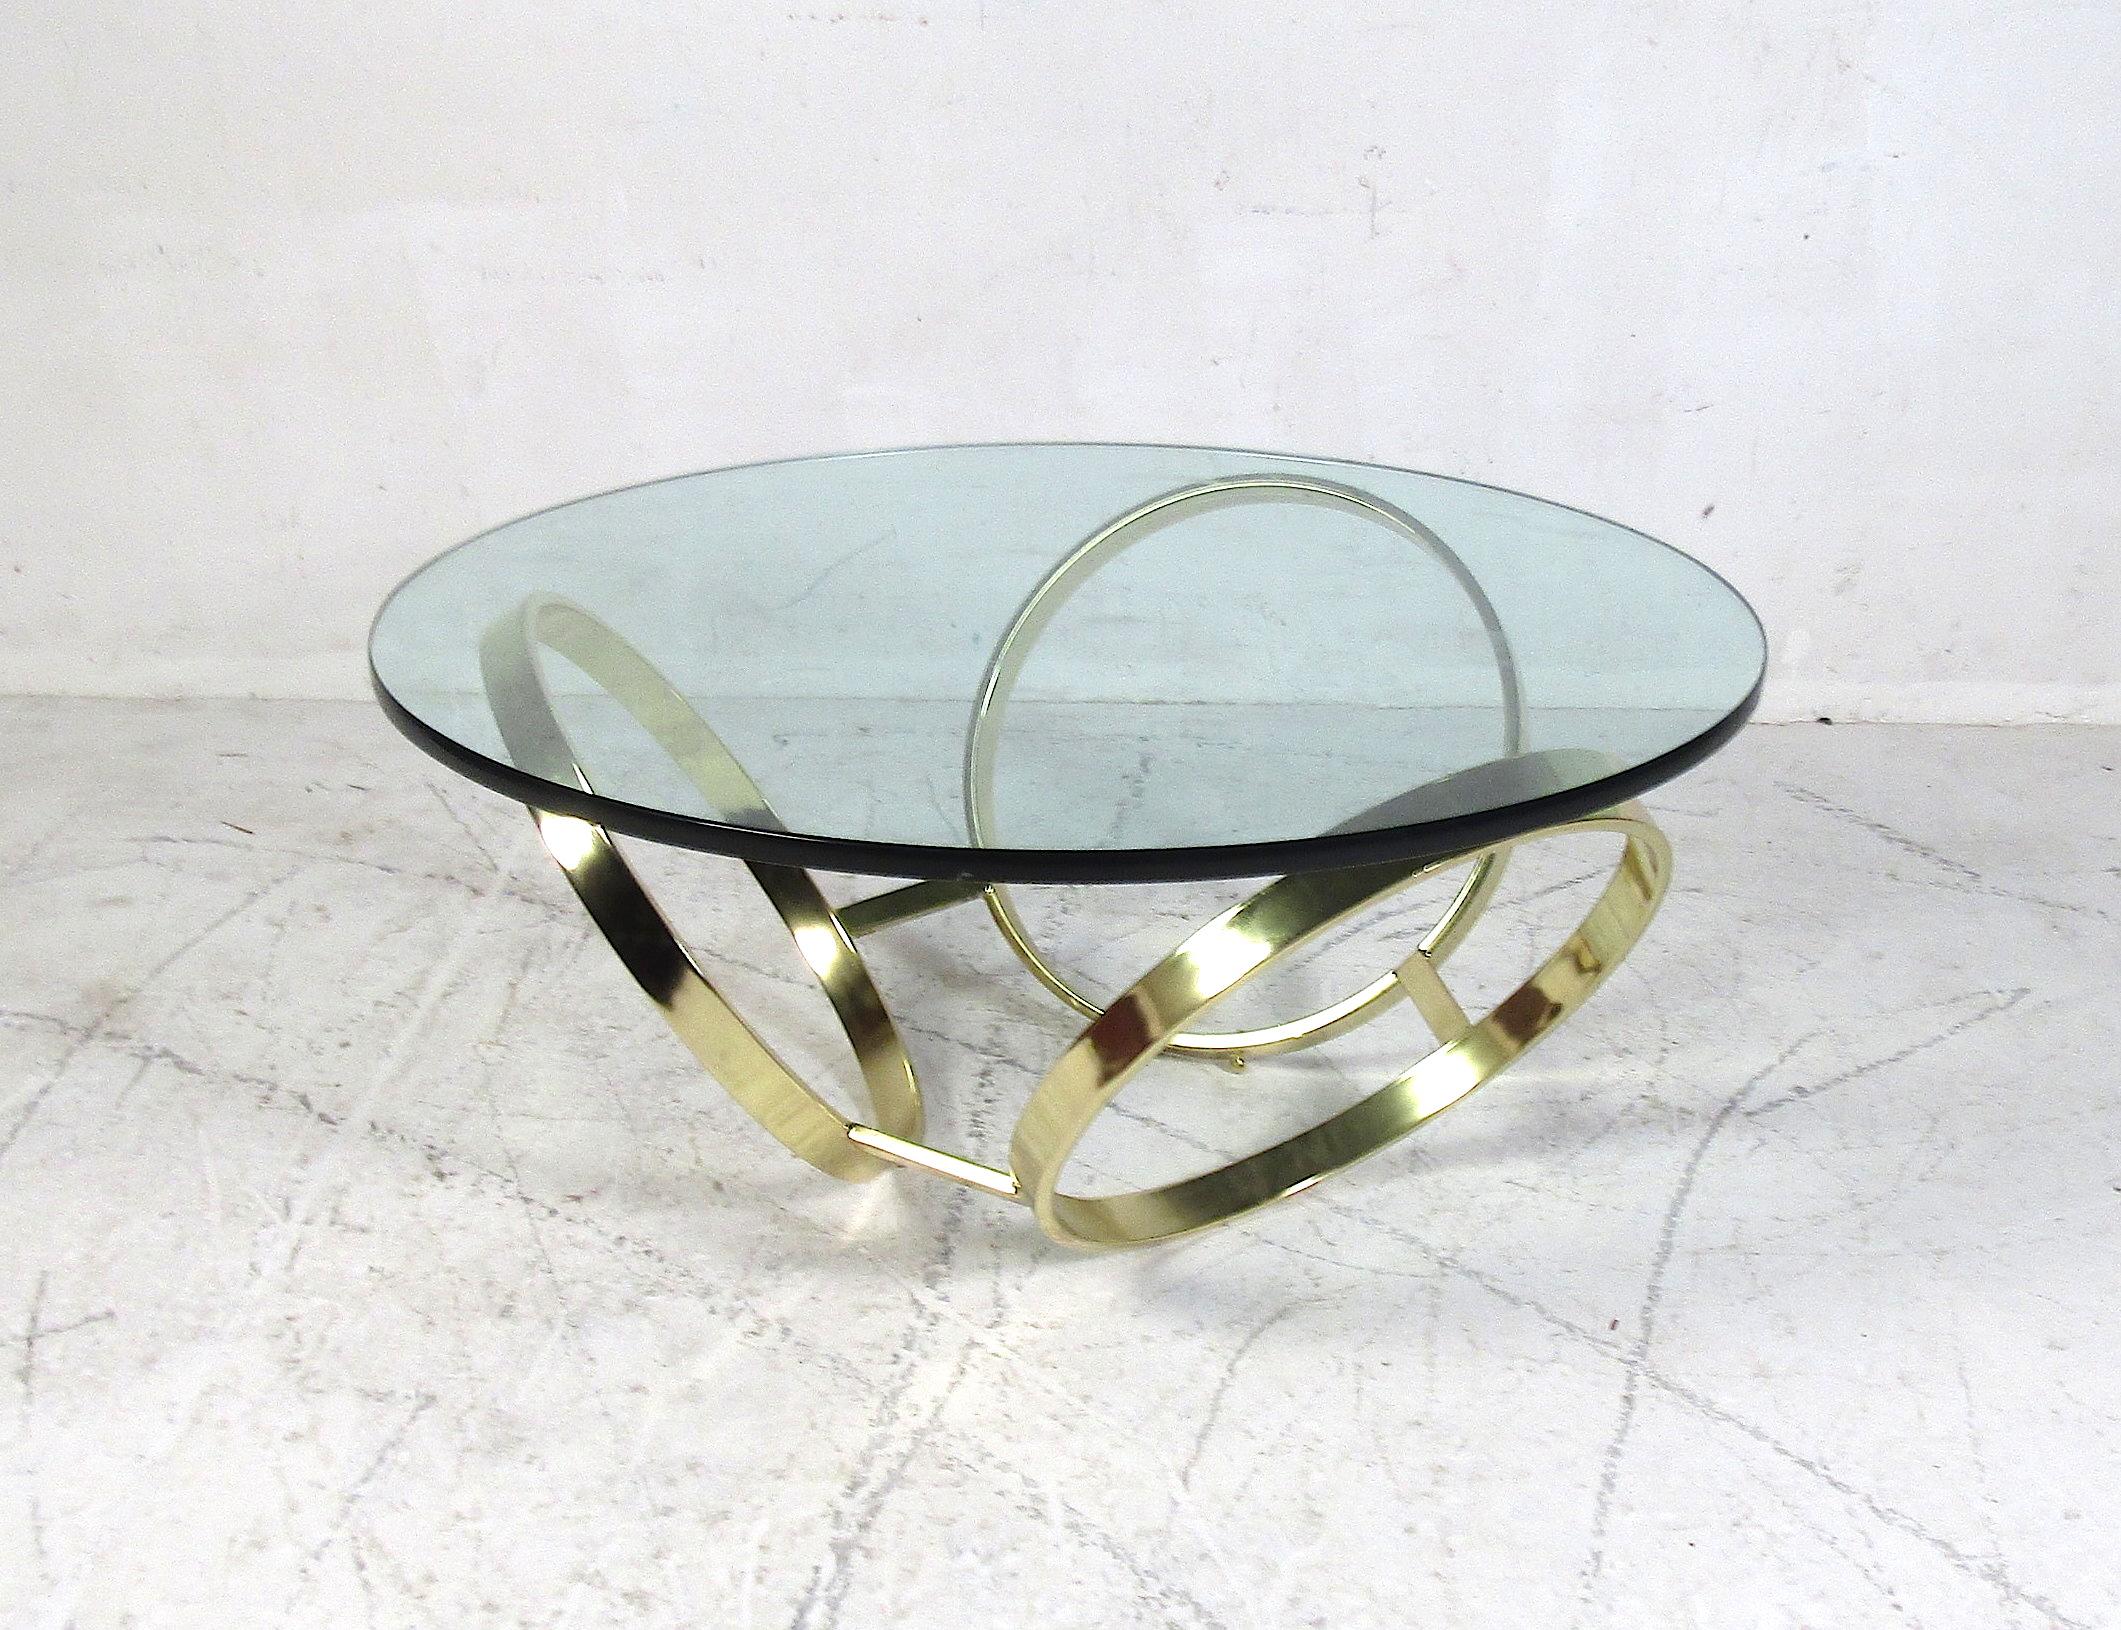 Stylish midcentury style brass and glass cocktail table. Interesting sculptural base with a glass top. Please confirm item location with dealer (NJ or NY).